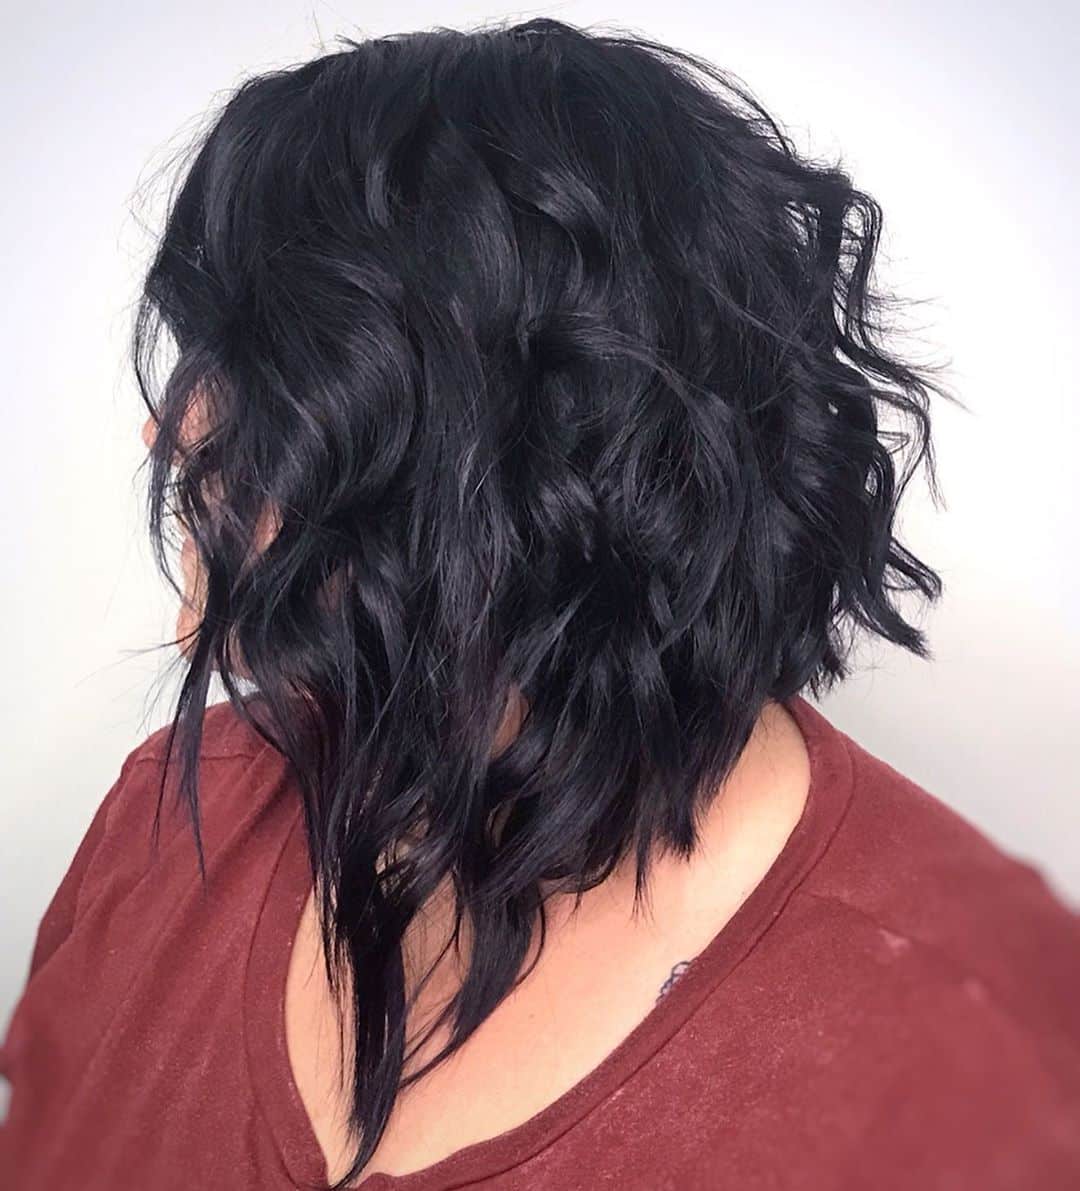 Inverted Curly Bob Style for a Round Face